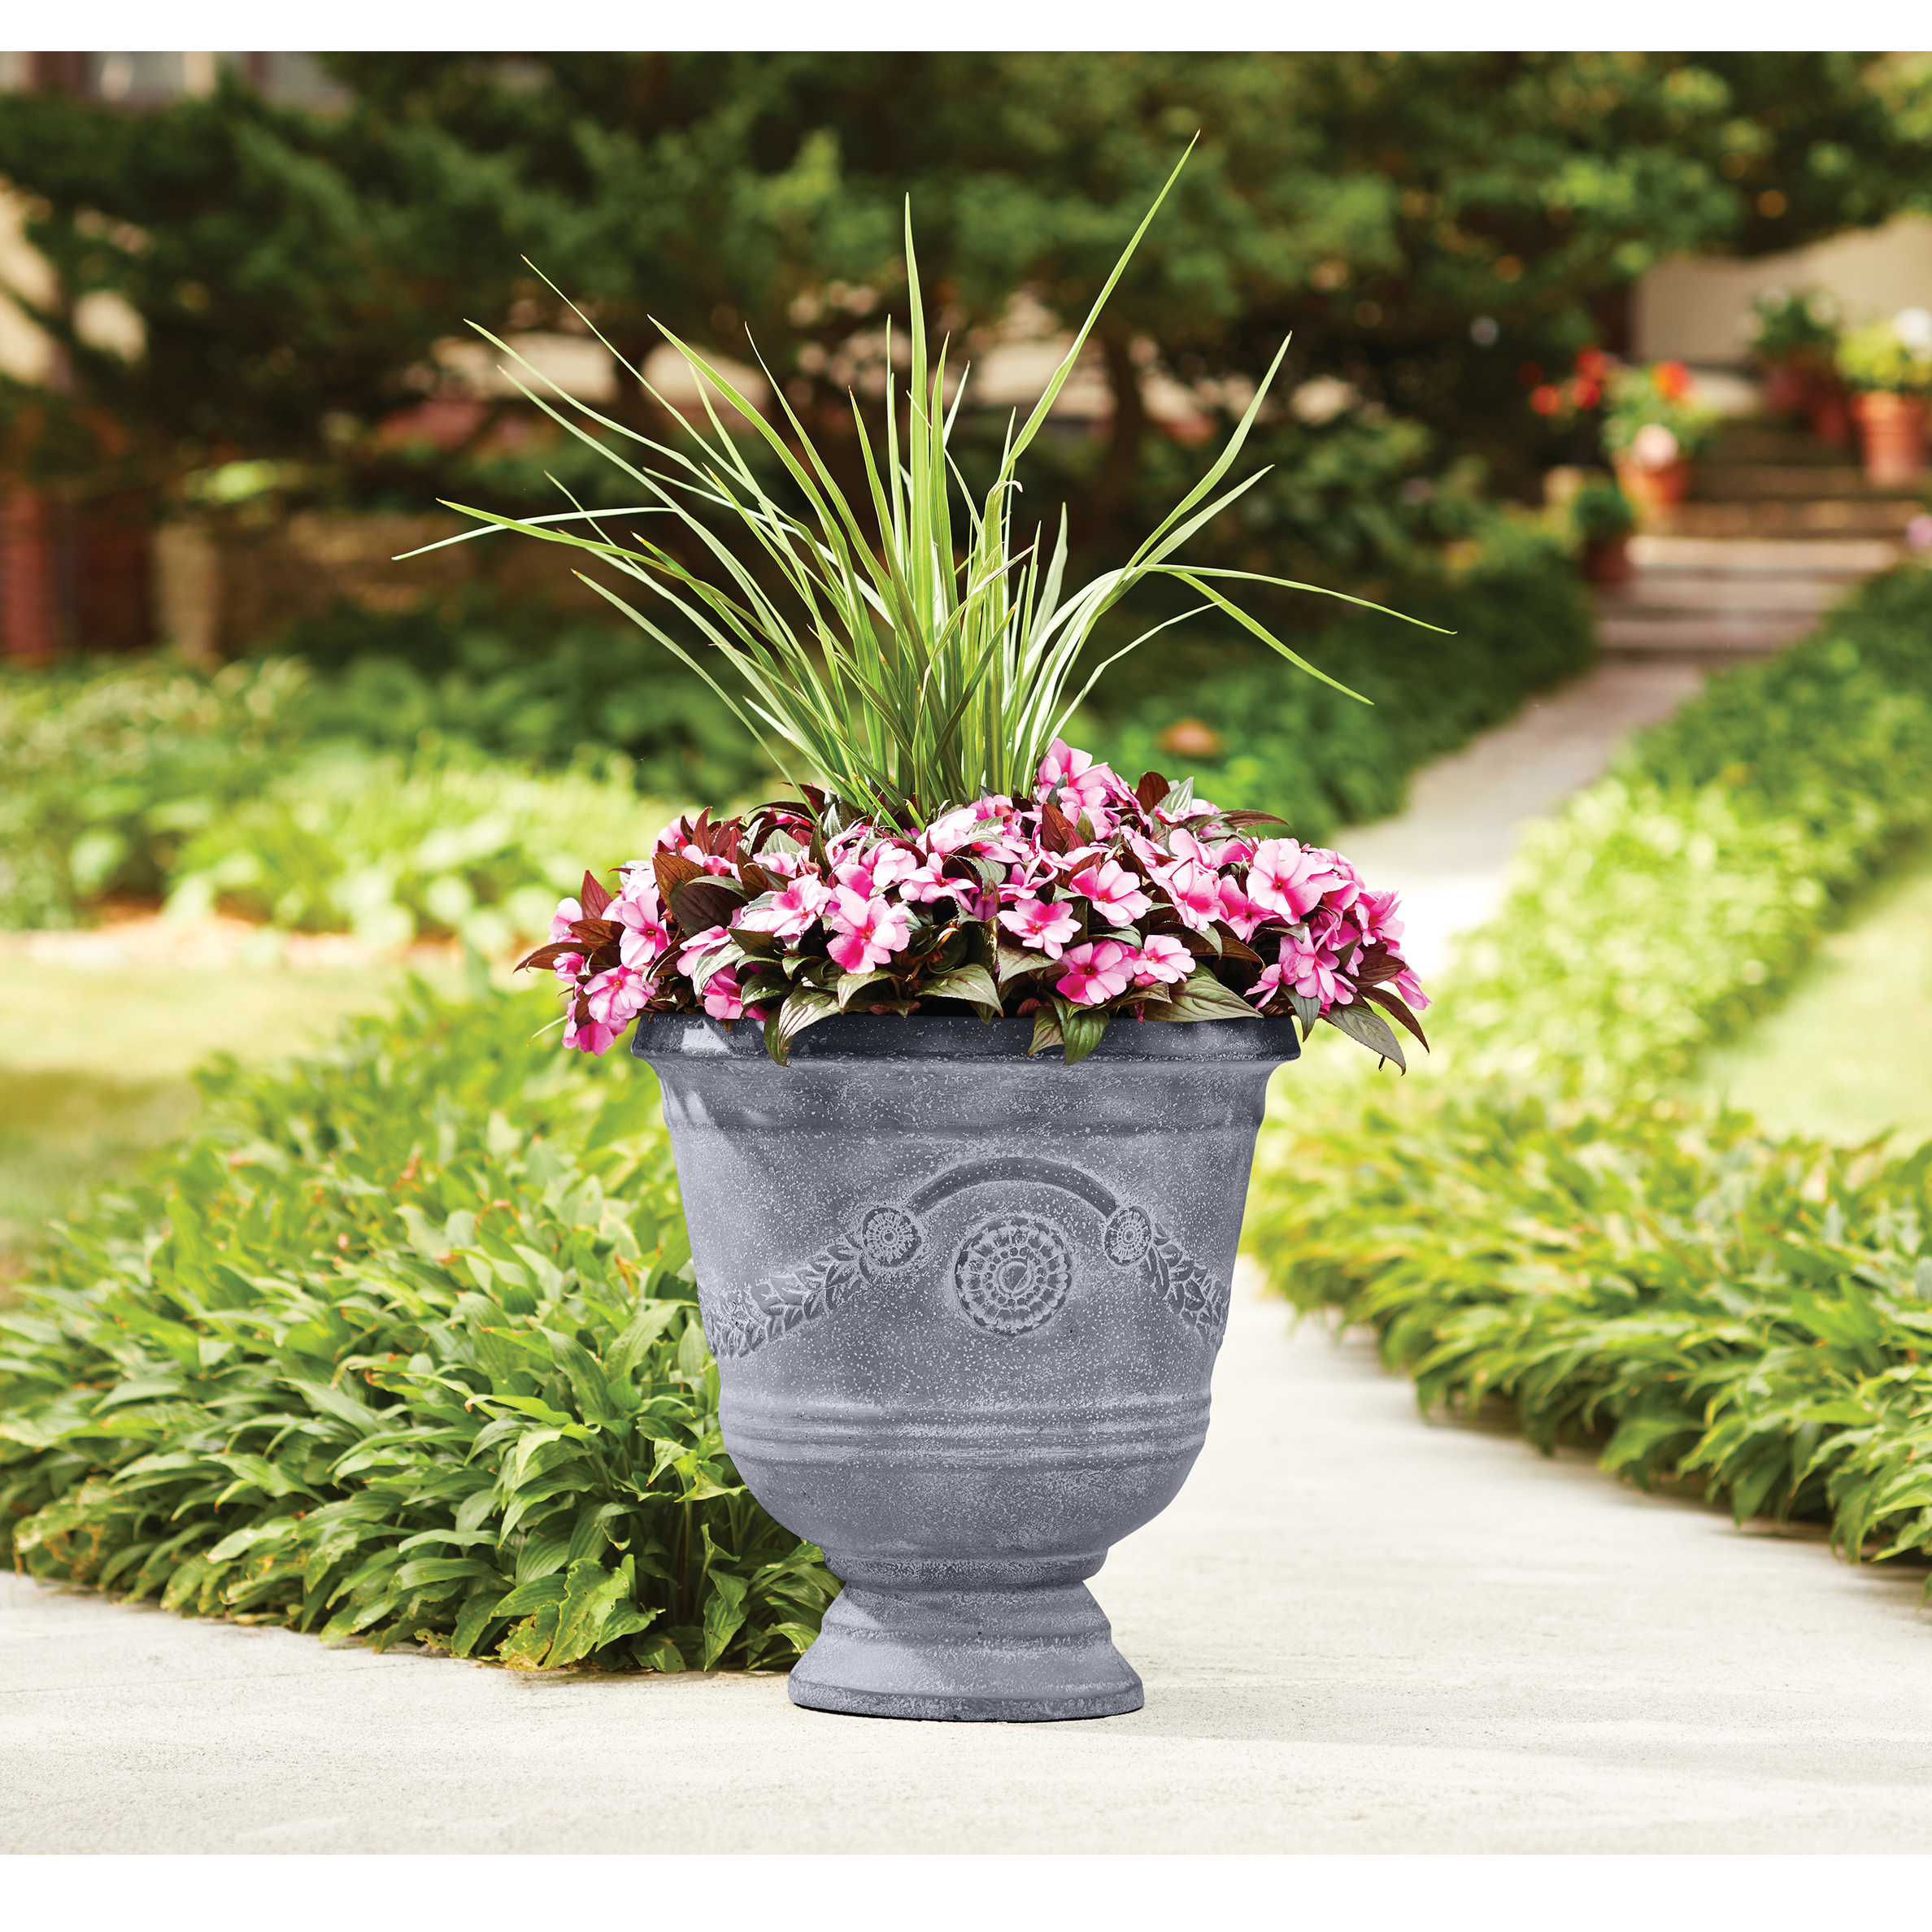 Better Homes and Gardens Greythorne 17in Outdoor Planter Set of 2 Only $19.99!